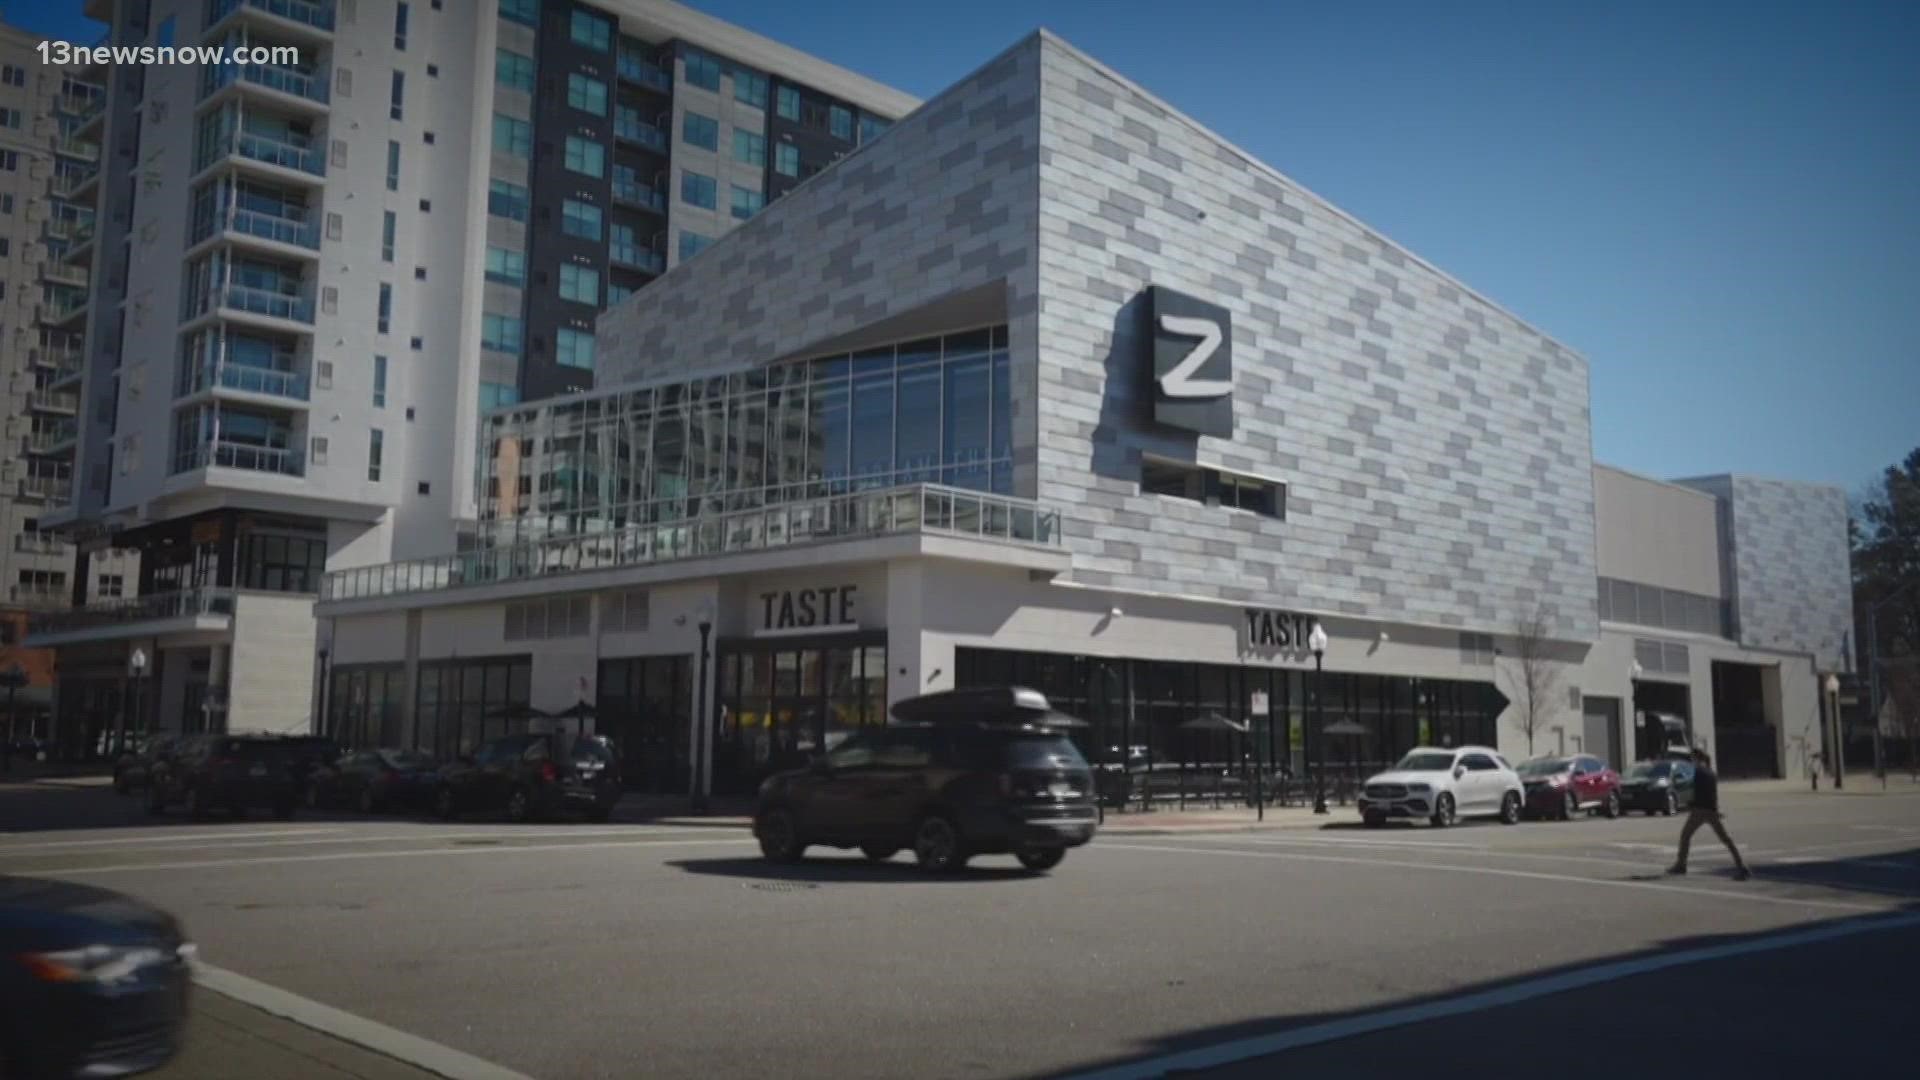 The theater, also known as "The Z," is one of the newest stages in the area. The nonprofit is working to make the arts accessible for everyone in Hampton Roads.